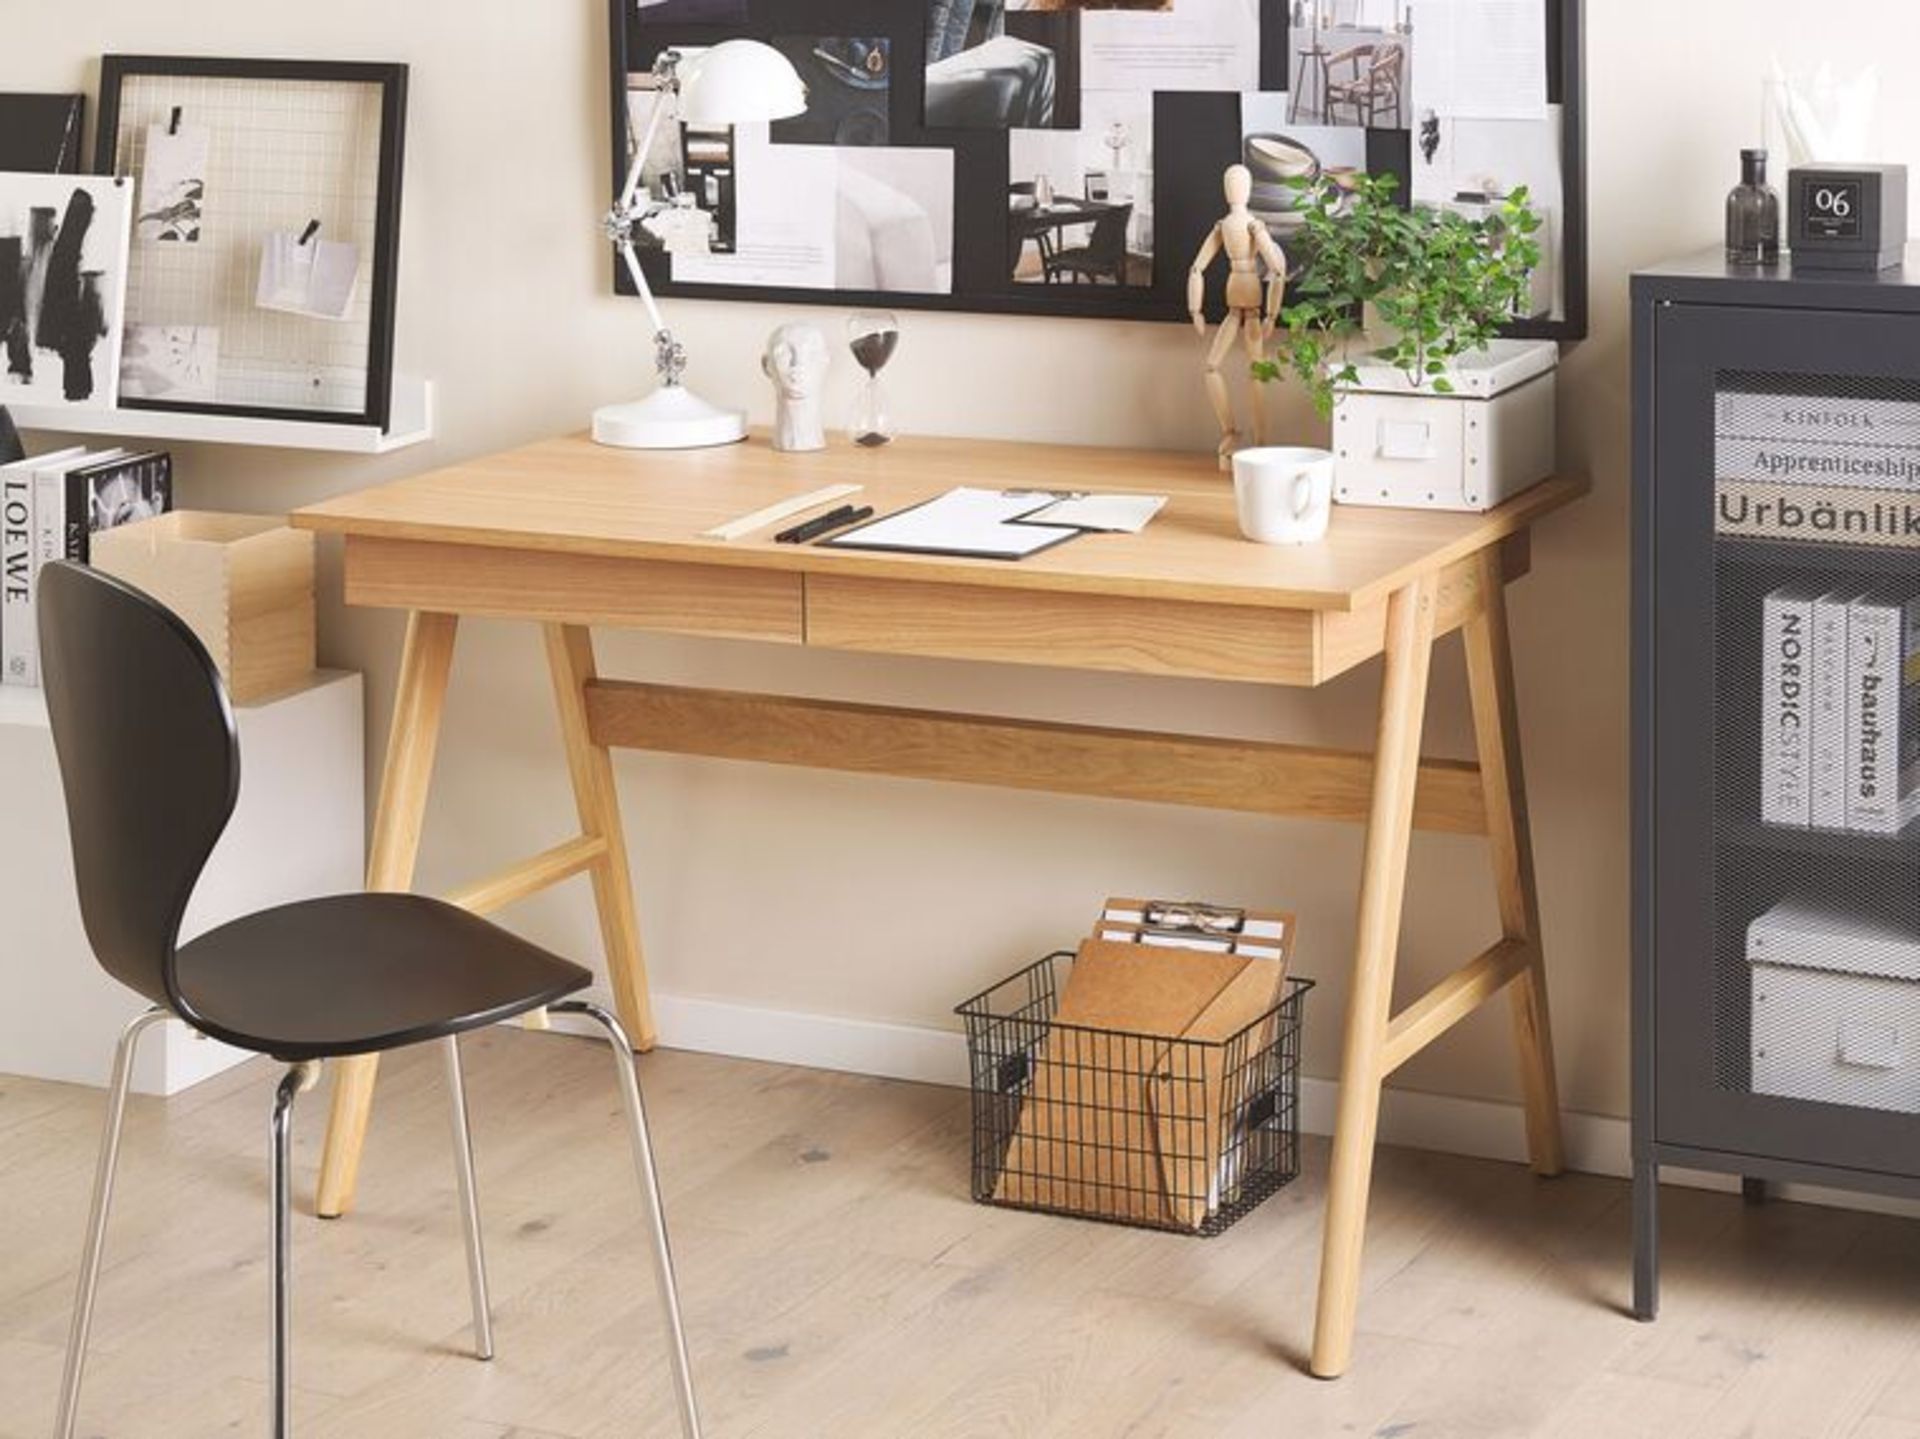 Sheslay 2 Drawer Home Office Desk 120 x 70 cm Light Wood. - R13a.9. RRP £579.99. A stylish yet - Image 2 of 2